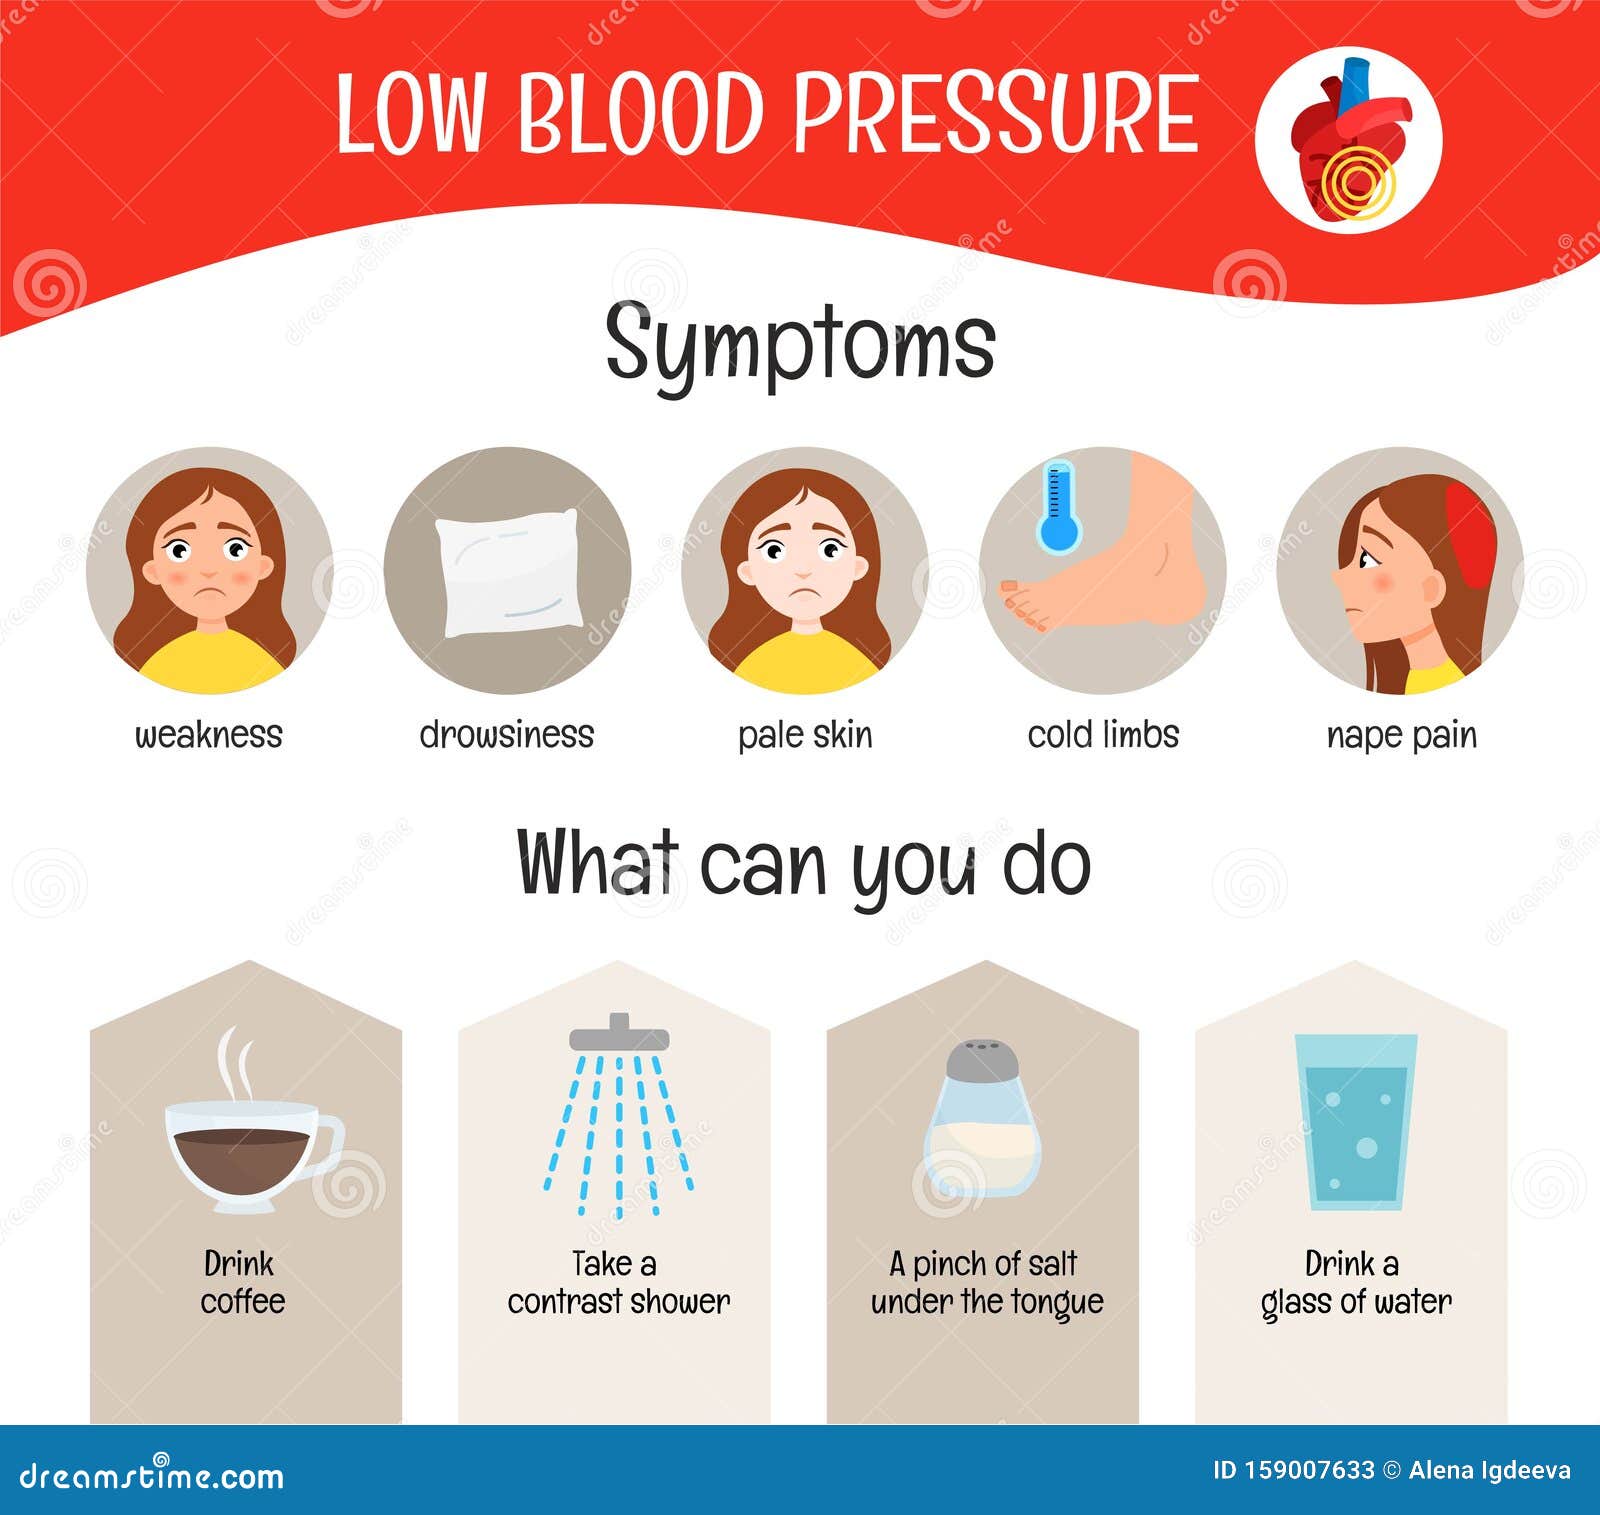 Seven Things To Eat Or Avoid To Lower Your Blood Pressure